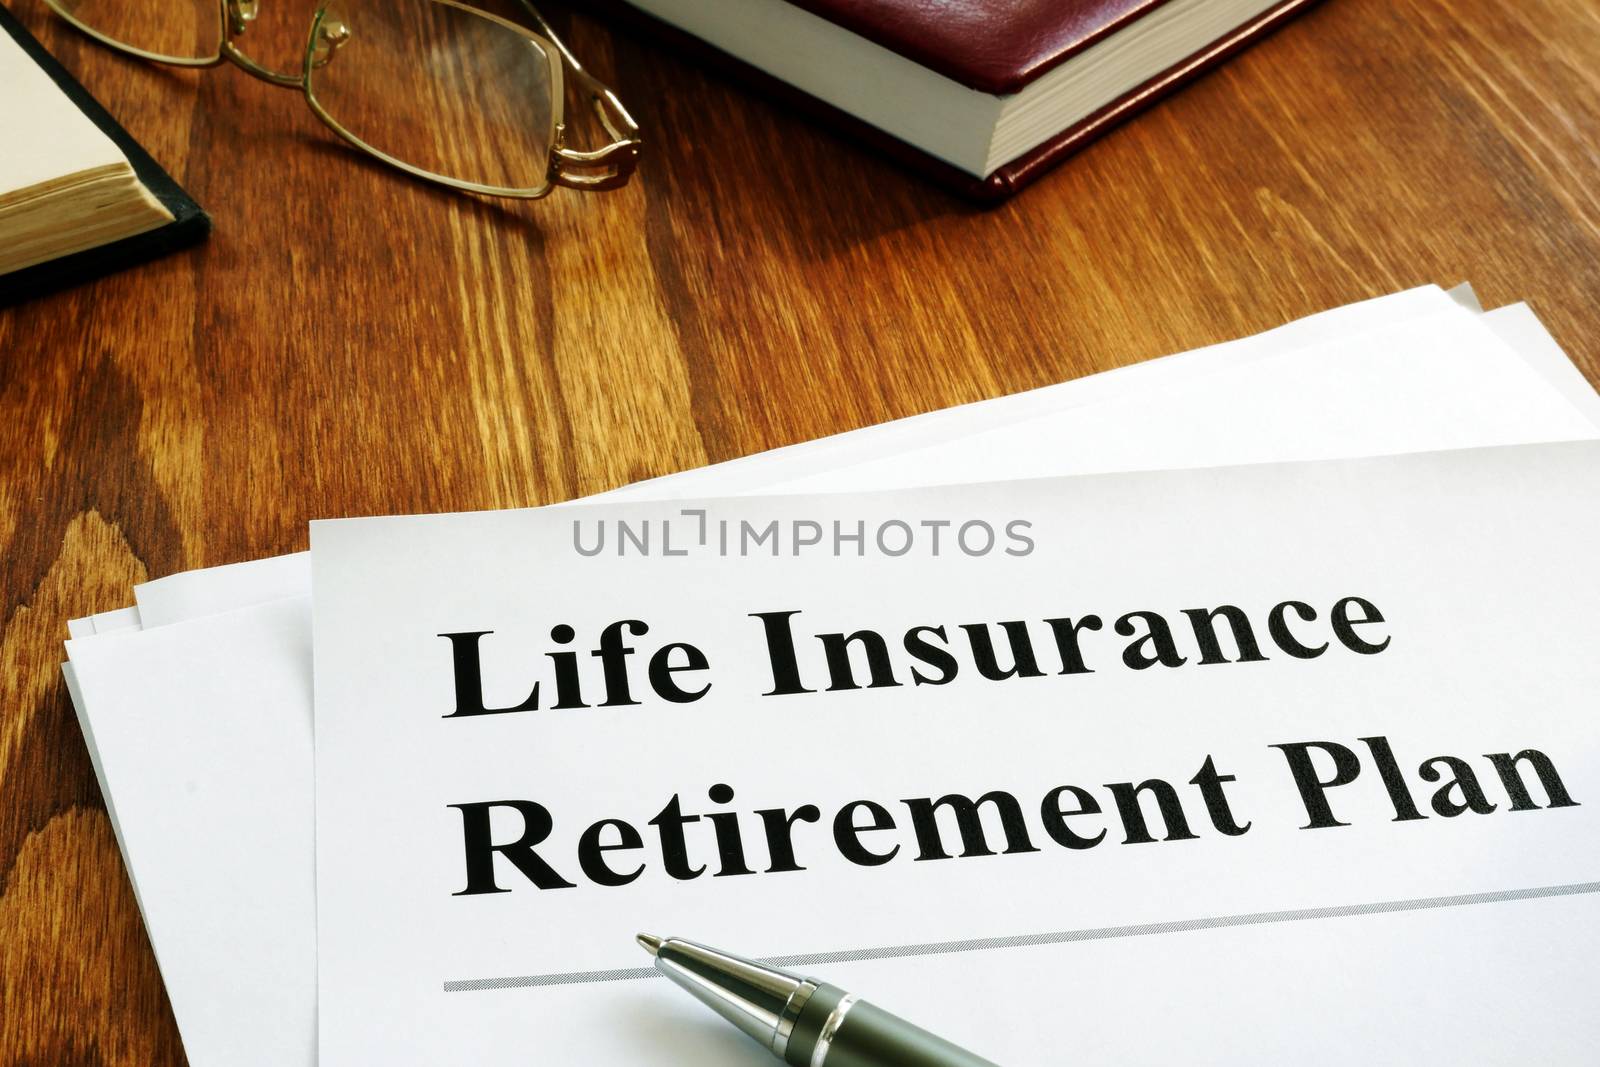 LIRP Life insurance retirement plan and glasses. by designer491